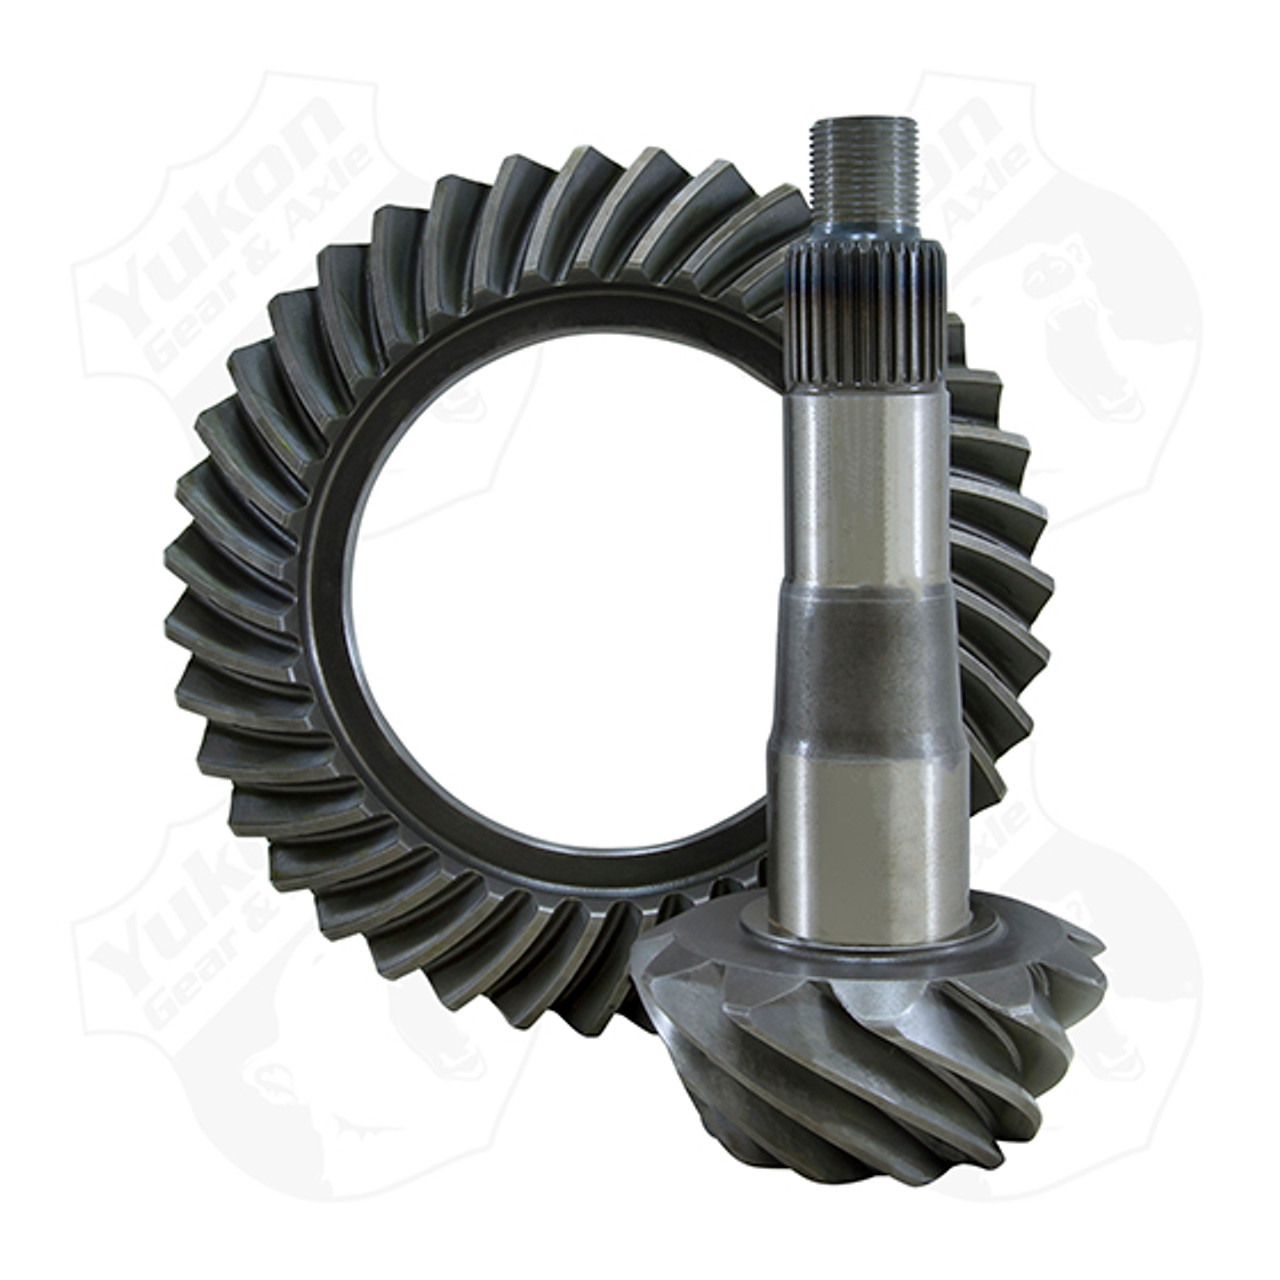 High performance Yukon Ring & Pinion gear set for GM Cast Iron Corvette in a 3.73 ratio